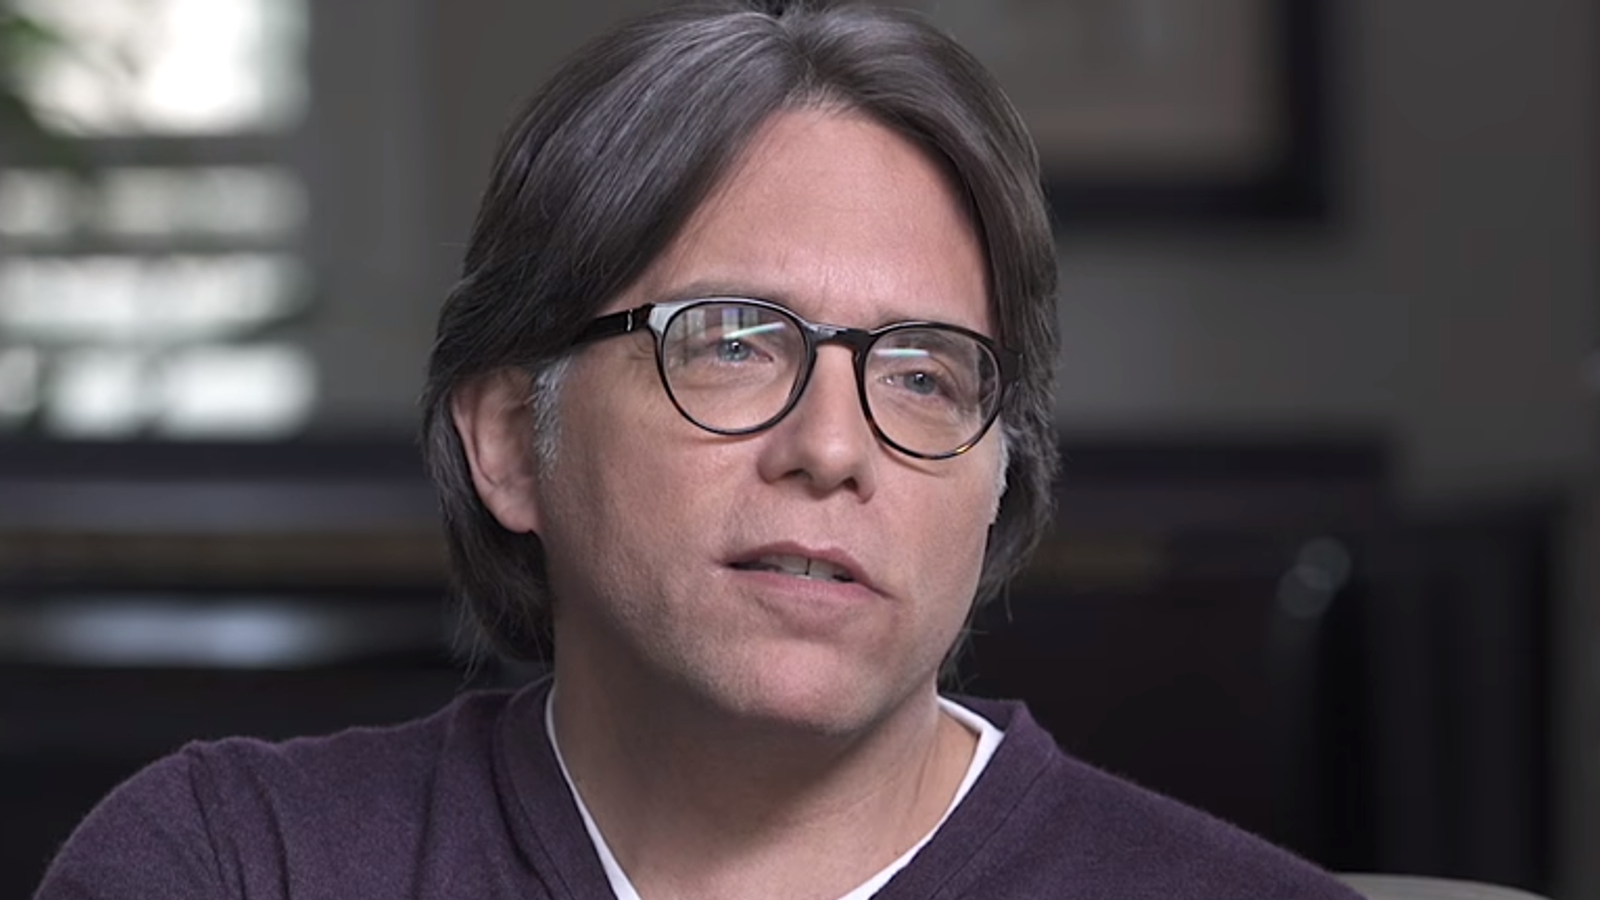 Keith Raniere: NXIVM sex cult leader sentenced to 120 years in prison | US News